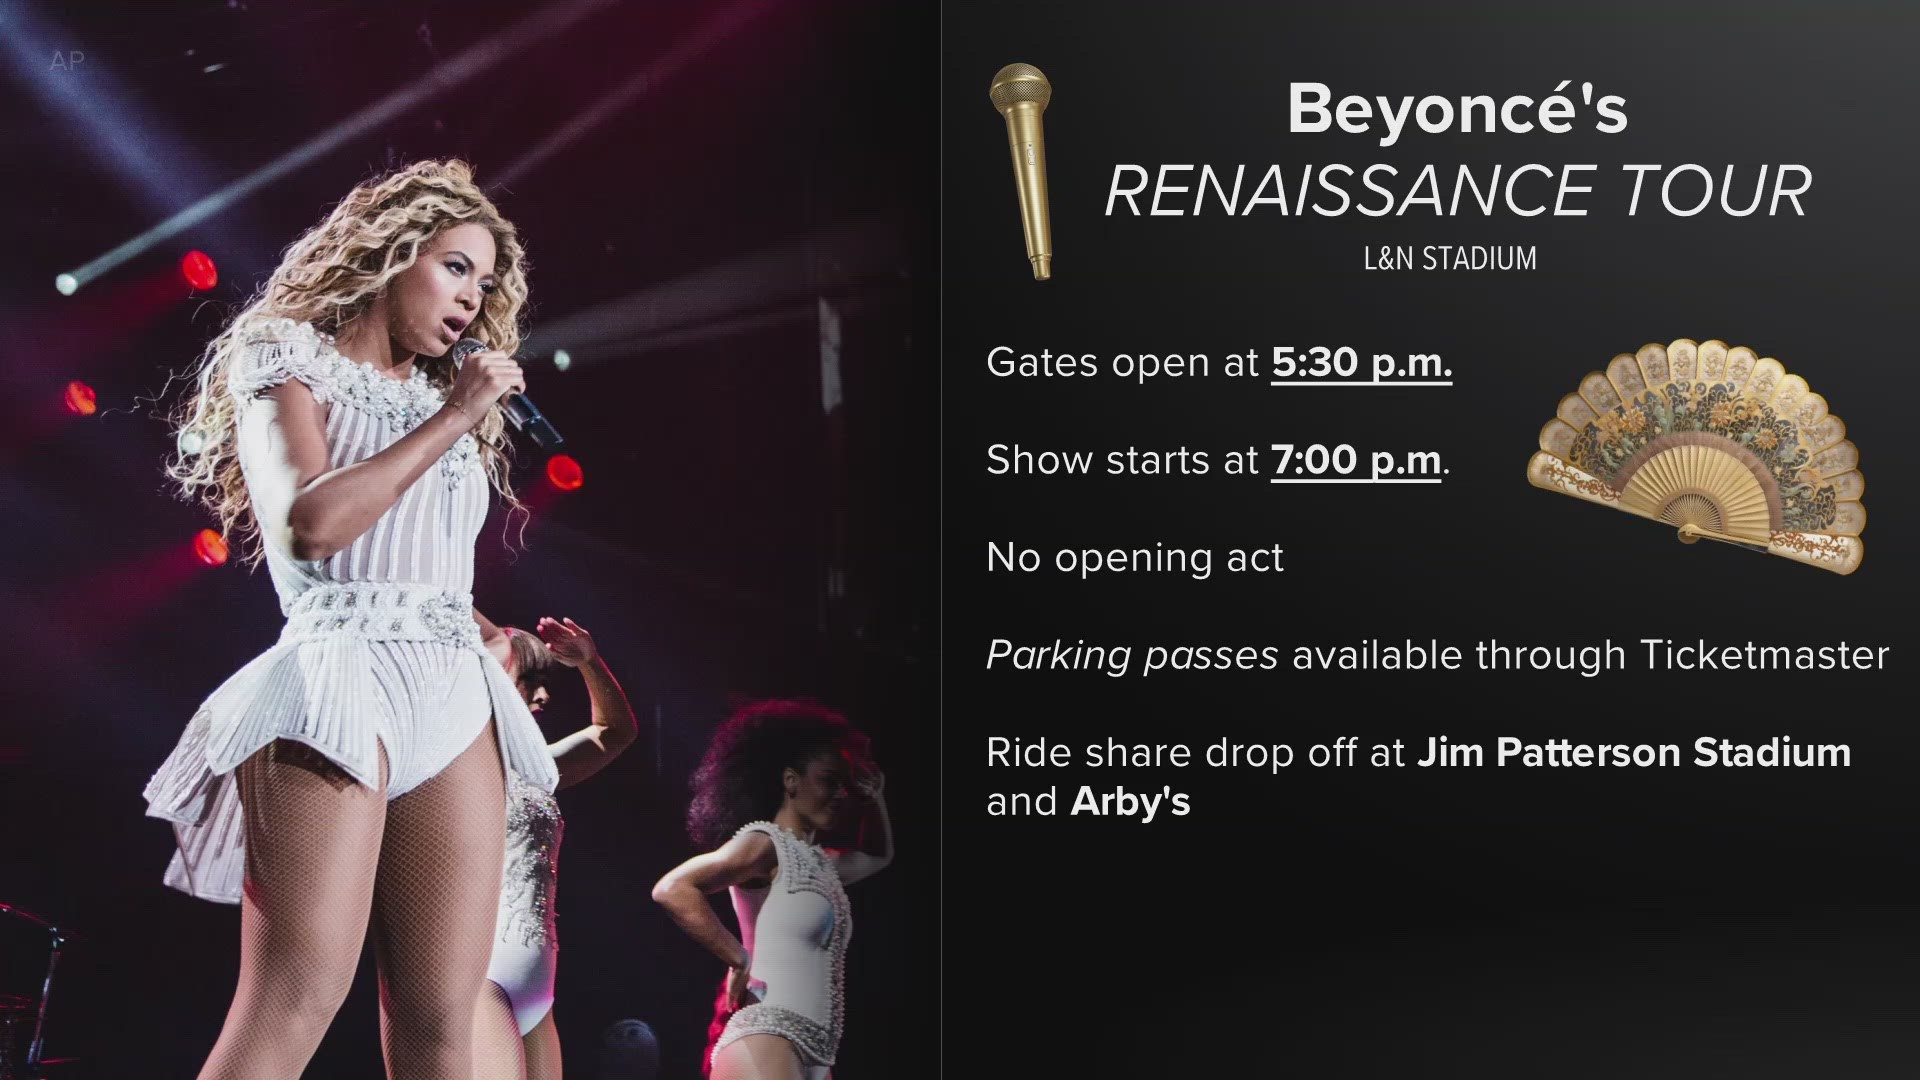 Things to know if you're attending Beyoncé's Renaissance Tour at L&N Federal Credit Union Stadium.